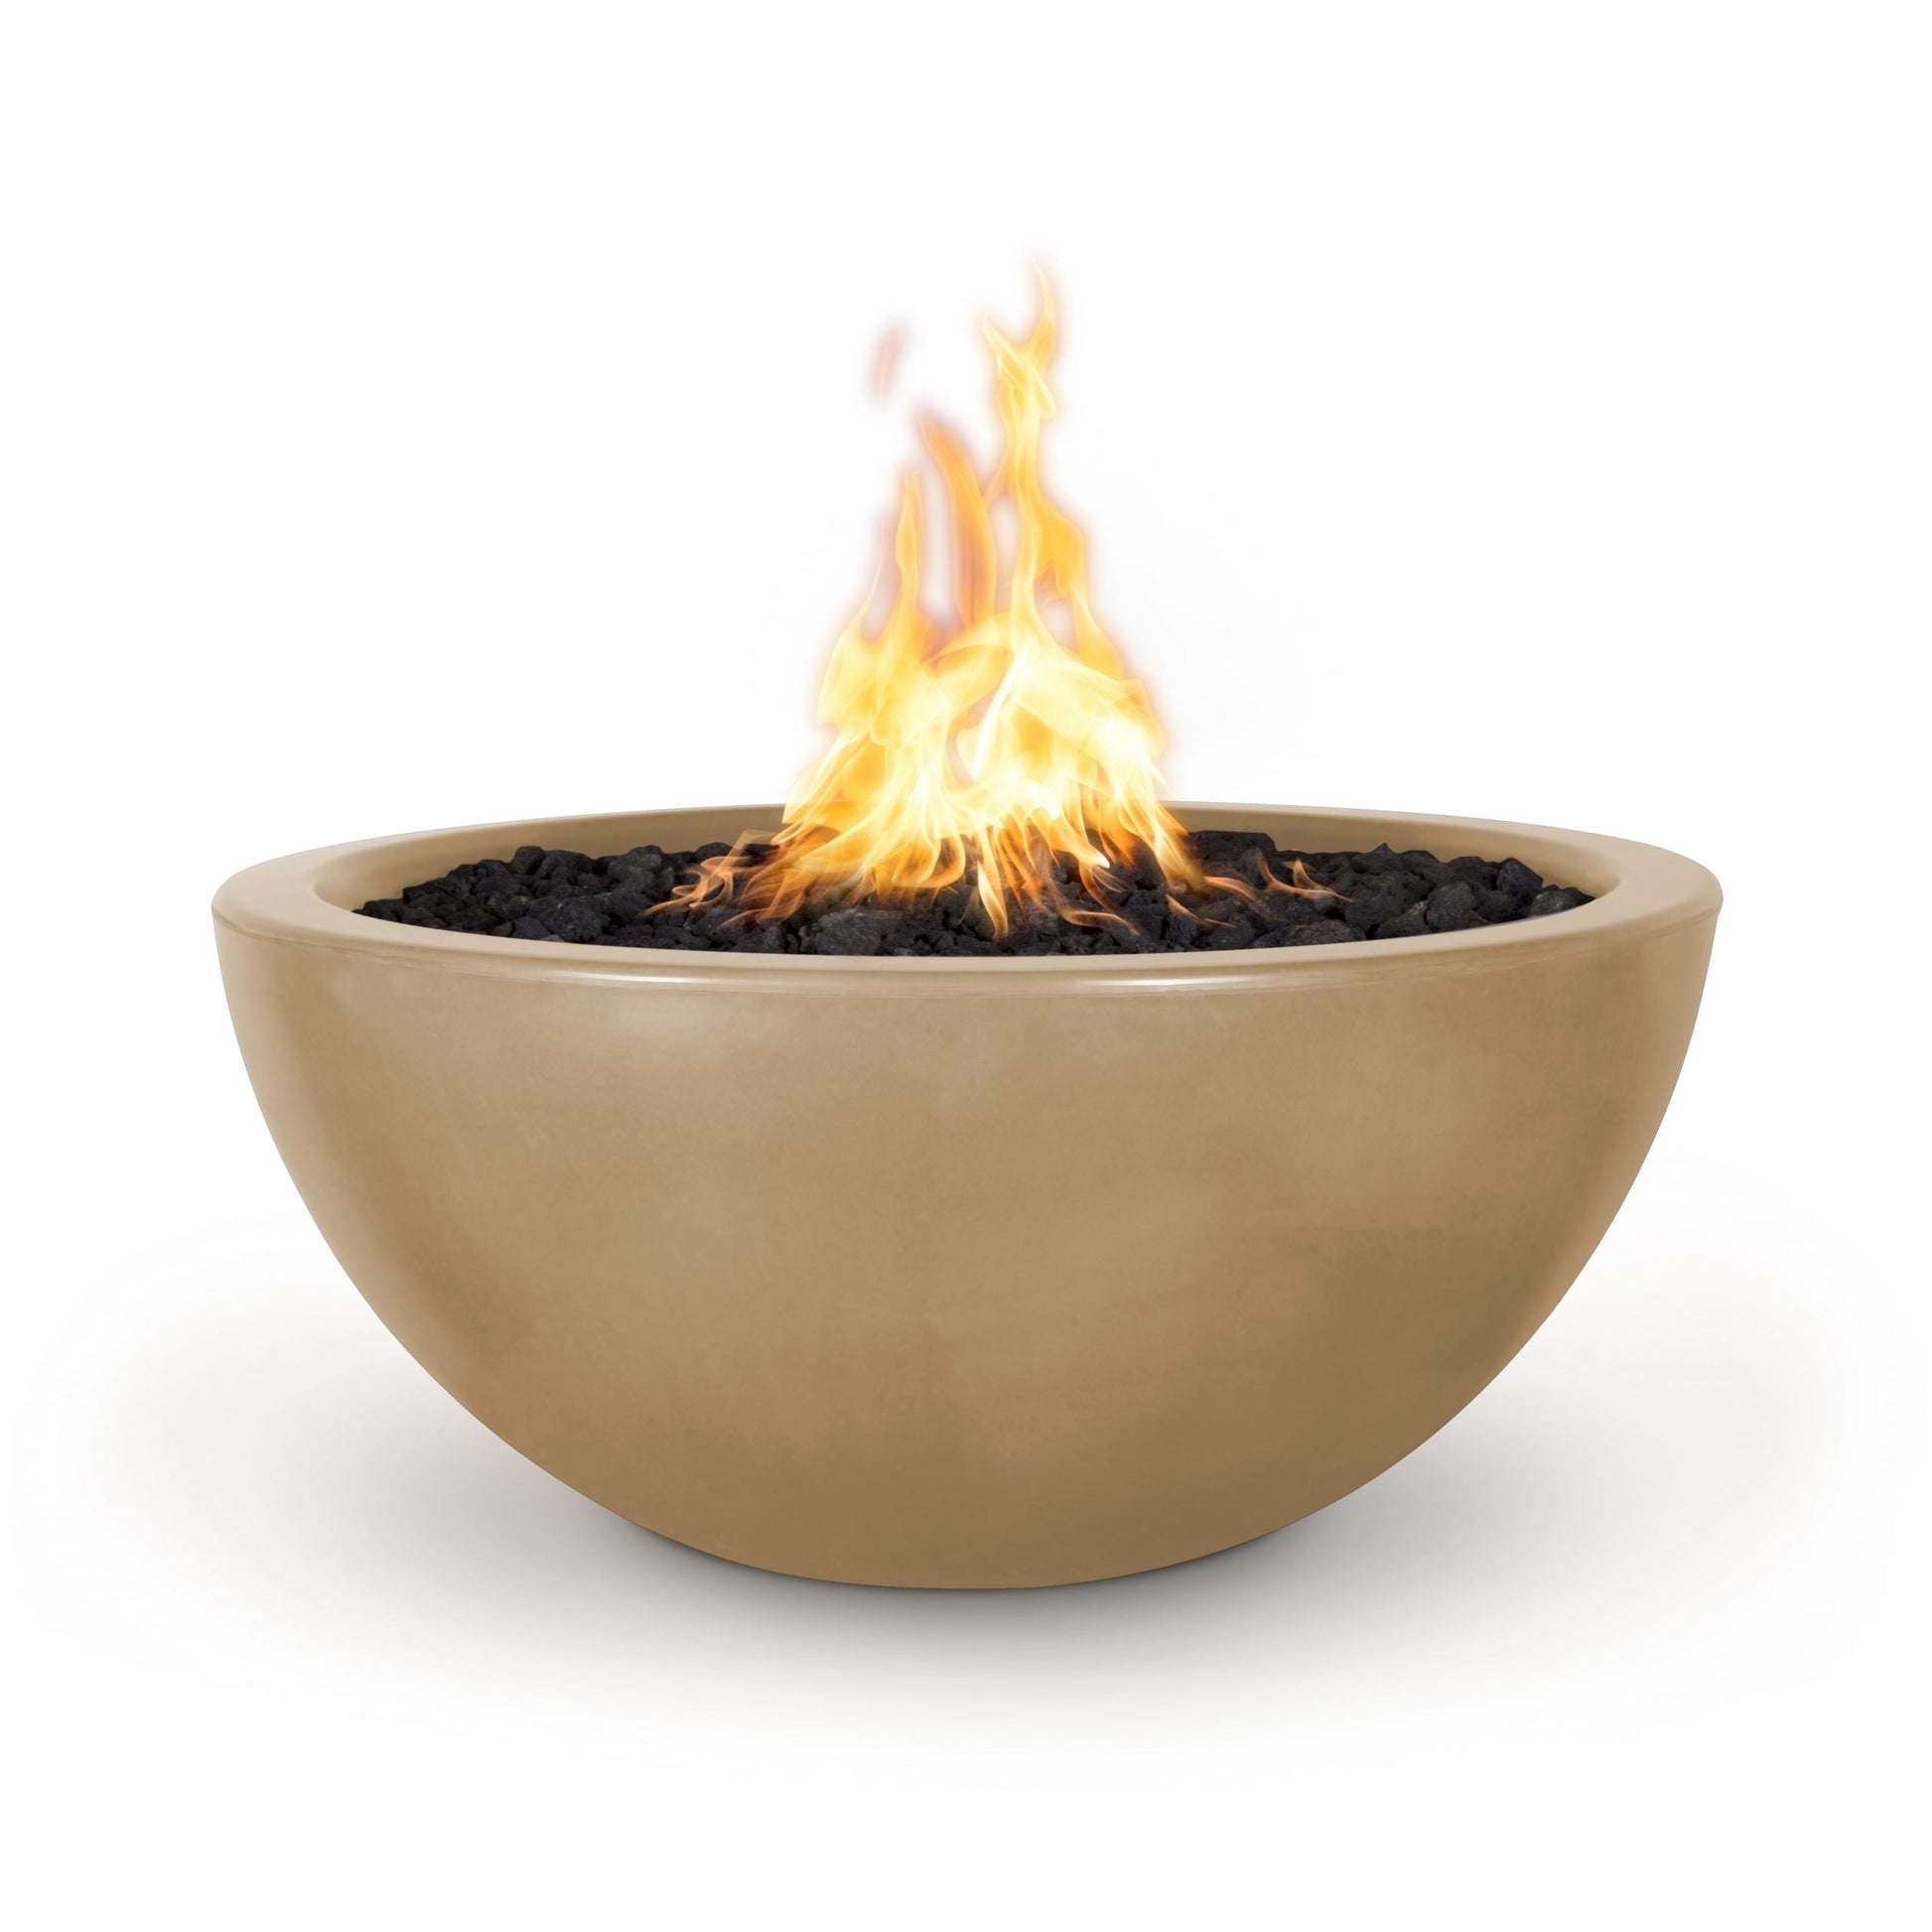 The Outdoor Plus Round Luna 30" Metallic Silver GFRC Concrete Natural Gas Fire Bowl with Match Lit with Flame Sense Ignition